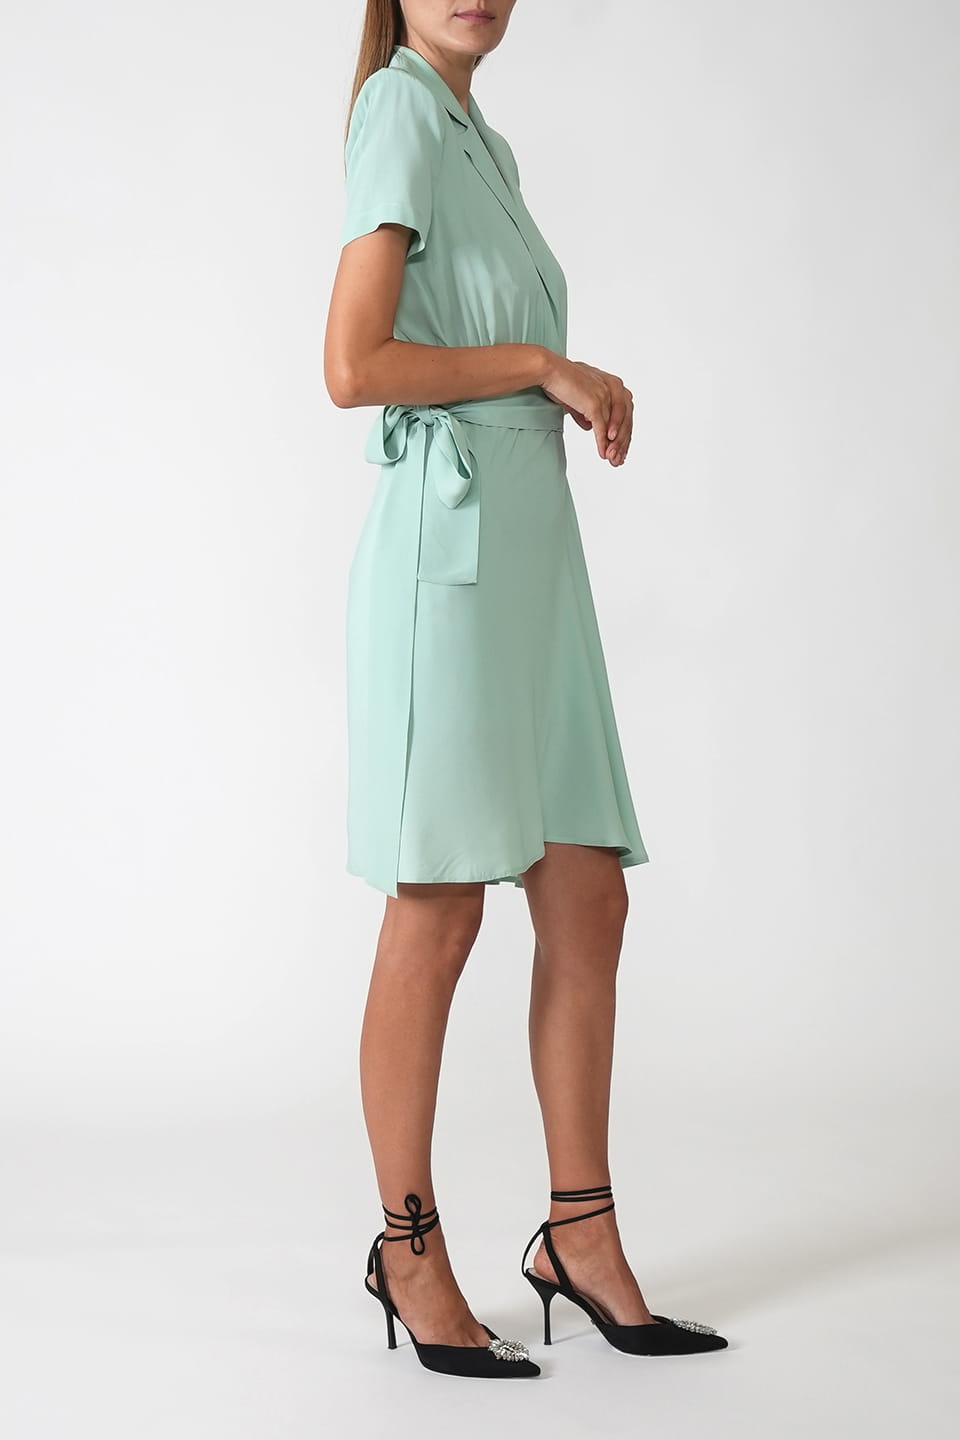 Designer Green Midi dresses, shop online with free delivery in UAE. Product gallery 3